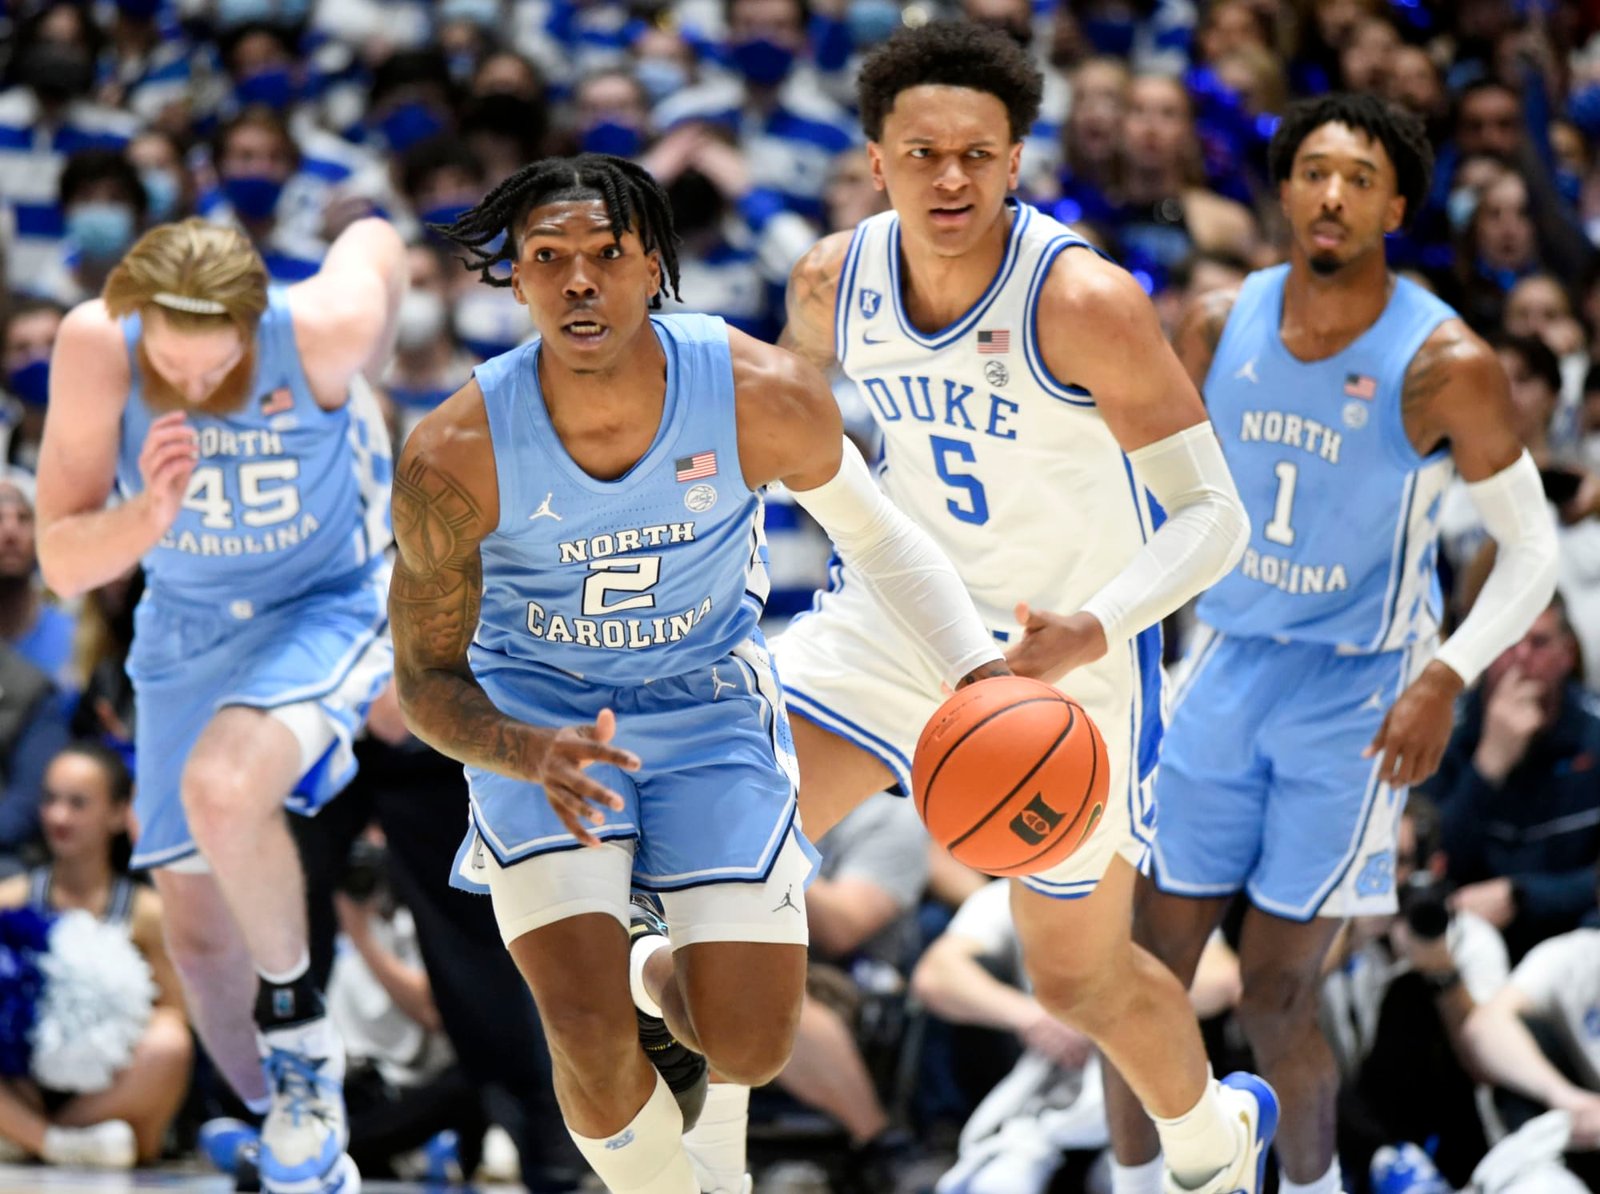 Has Duke ever performed UNC in March Insanity?